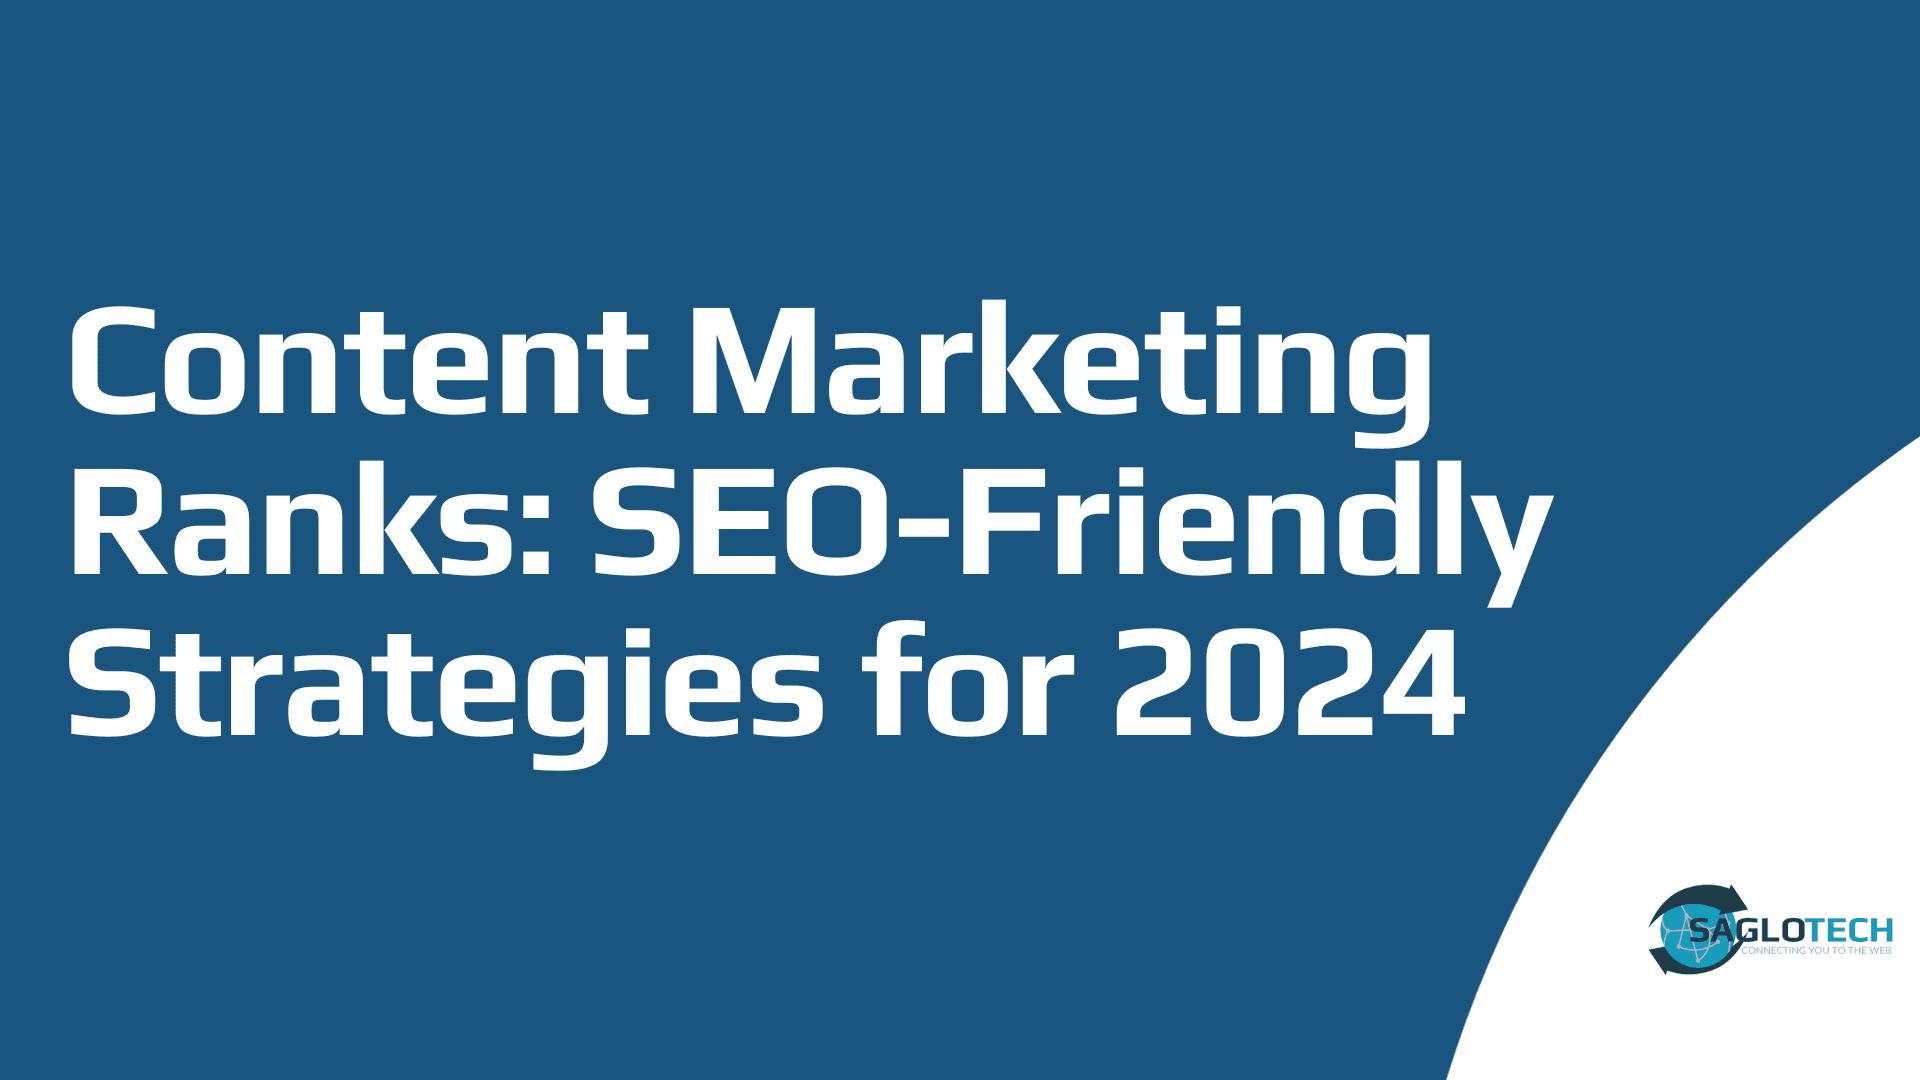 Content Marketing that Ranks: SEO-Friendly Strategies for 2024